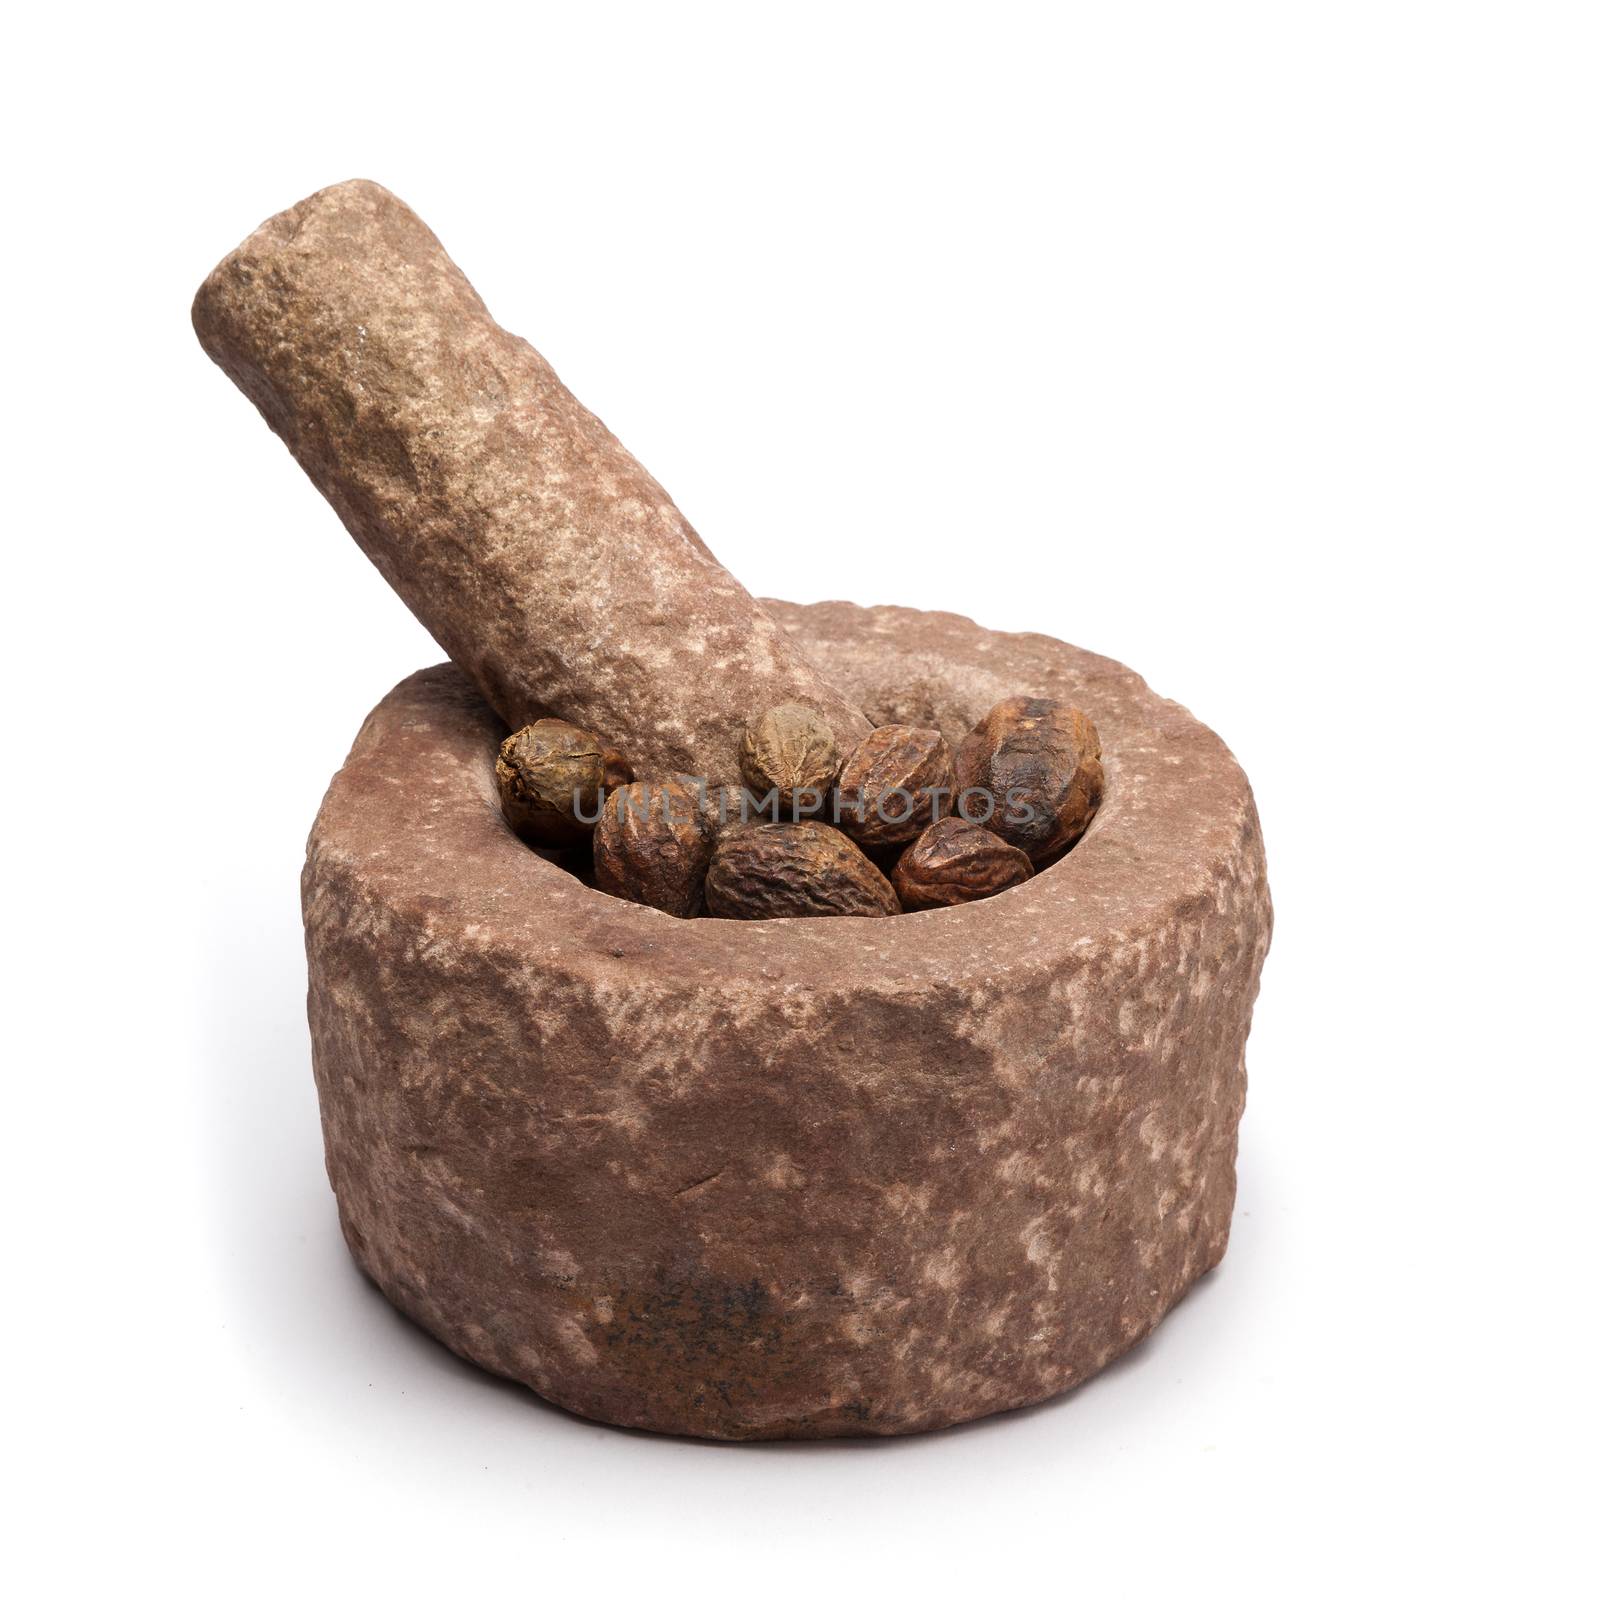 Organic Inknut or Harr (Terminalia chebula) in mortar with pestle, isolated on white background.